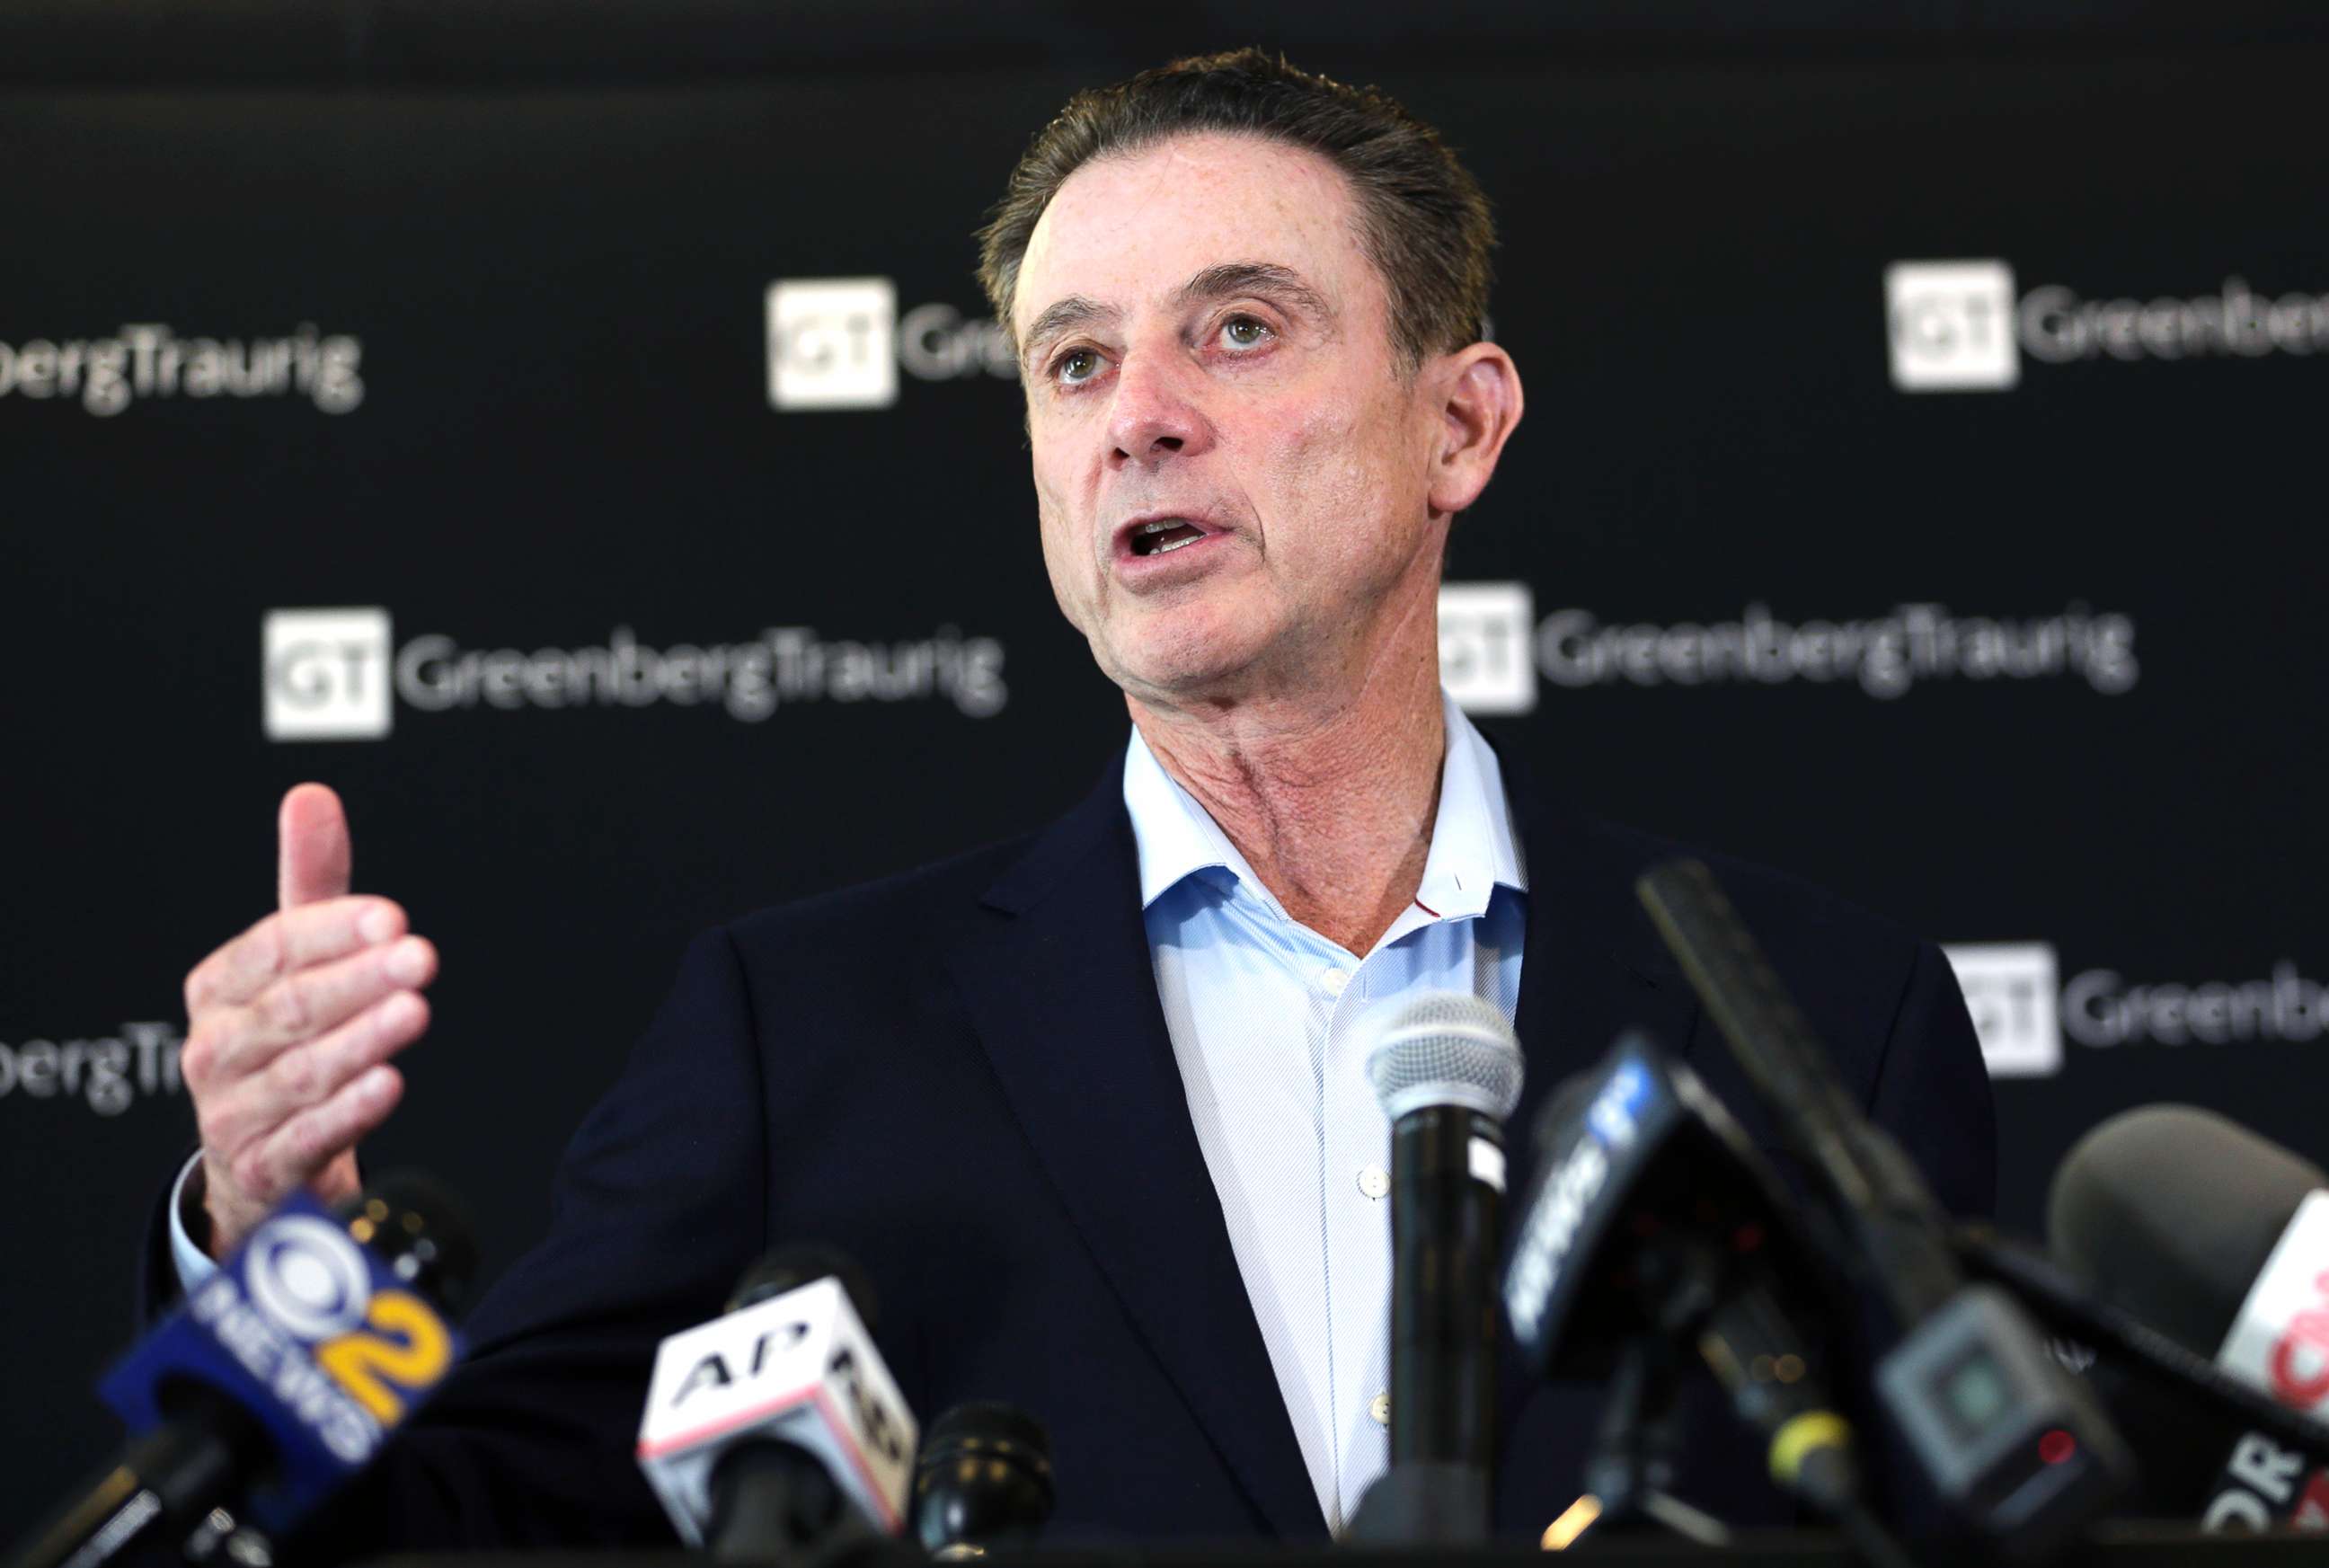 PHOTO: In this Feb. 21, 2018, file photo, former Louisville basketball coach Rick Pitino appears during a news conference in New York.